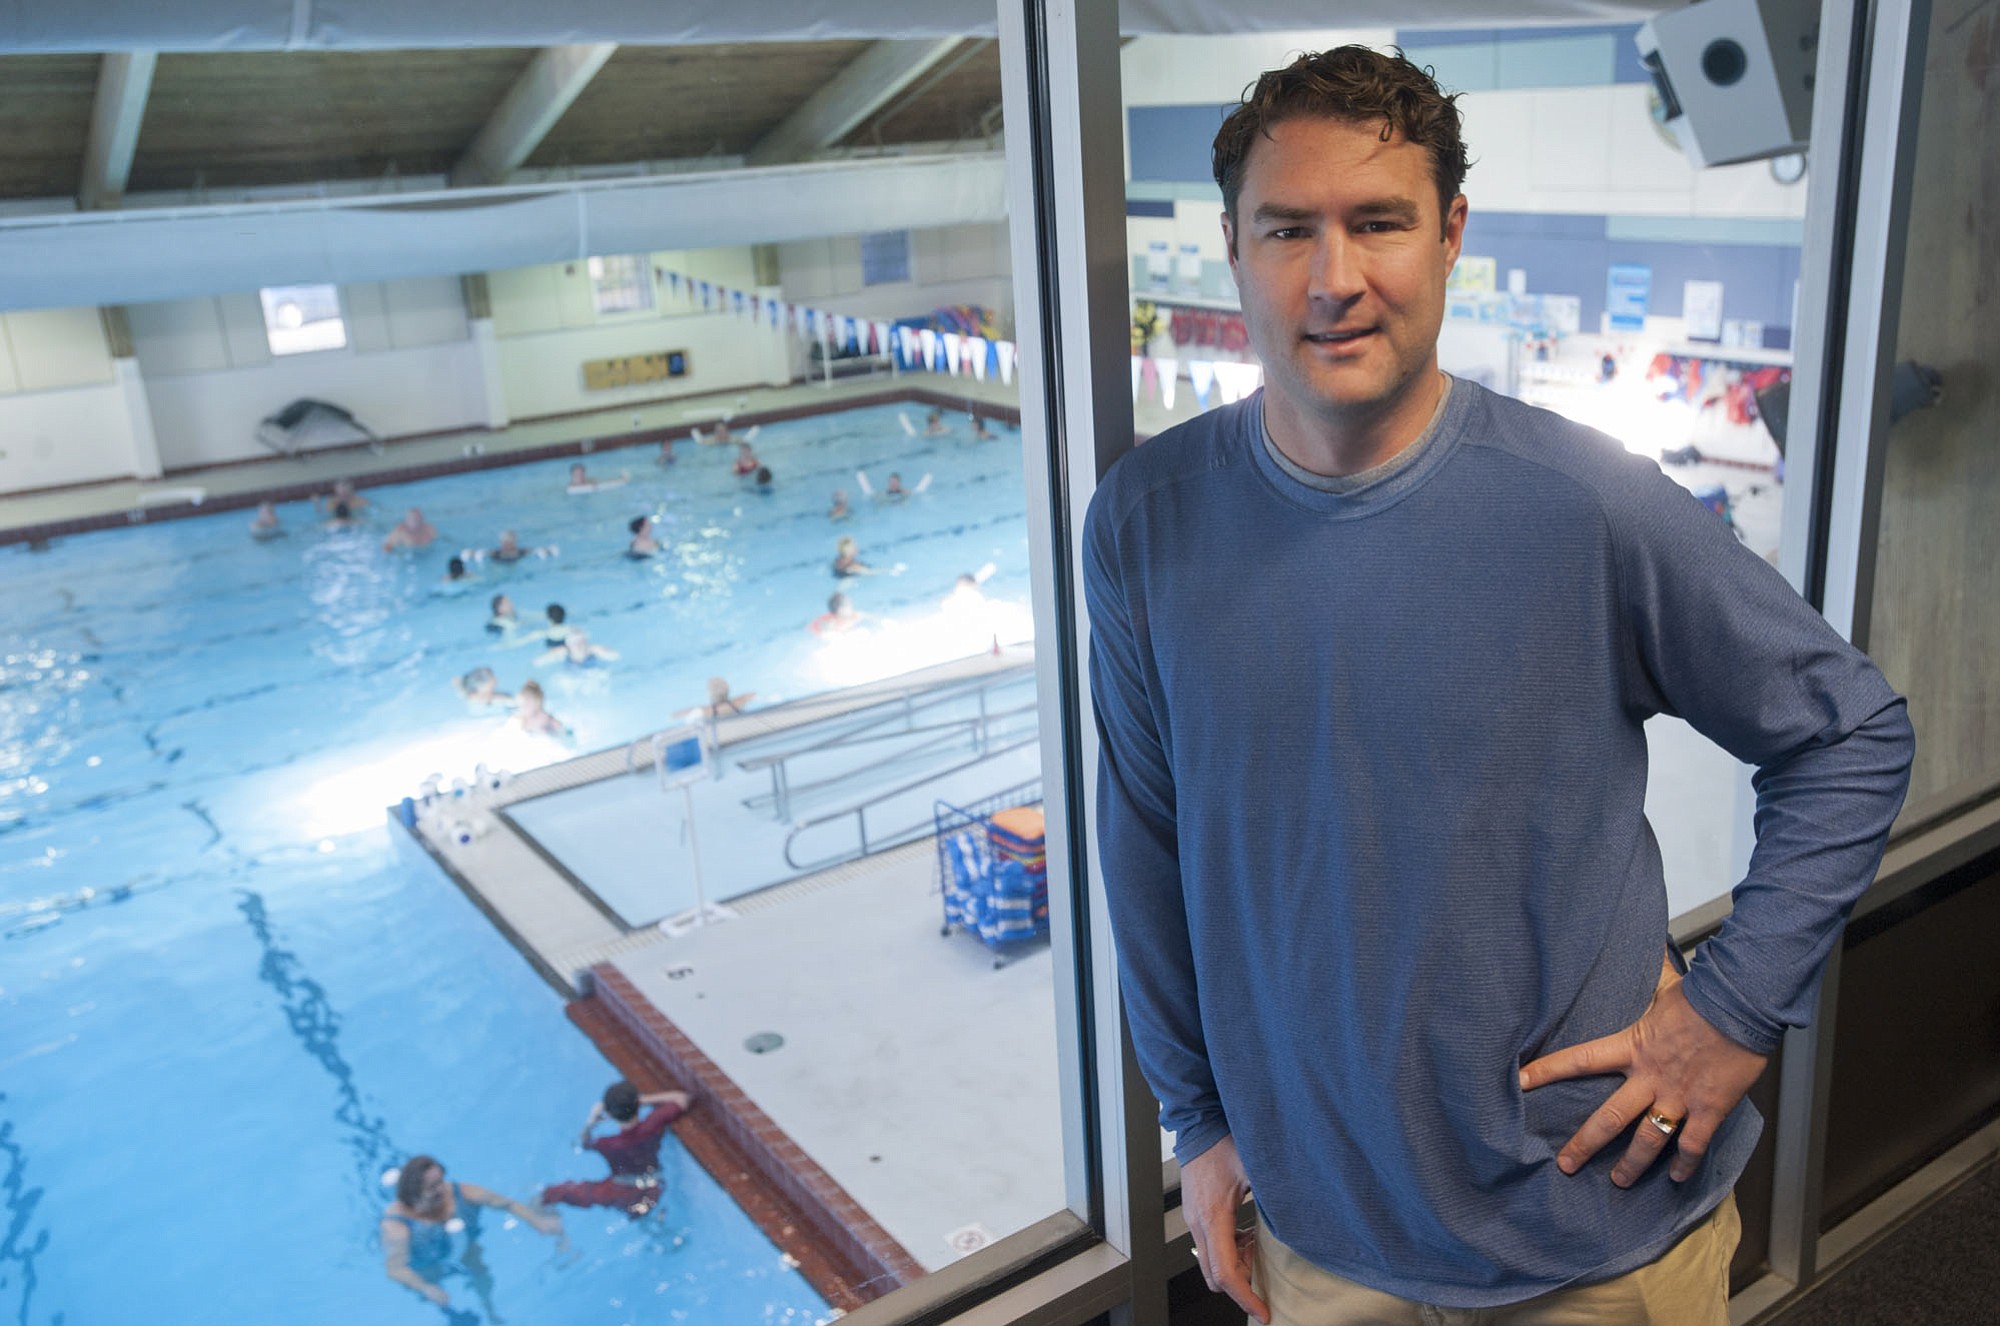 Vancouver City Councilman Bart Hansen stands in the pool observation deck area last week at the Marshall Community Center in Vancouver.